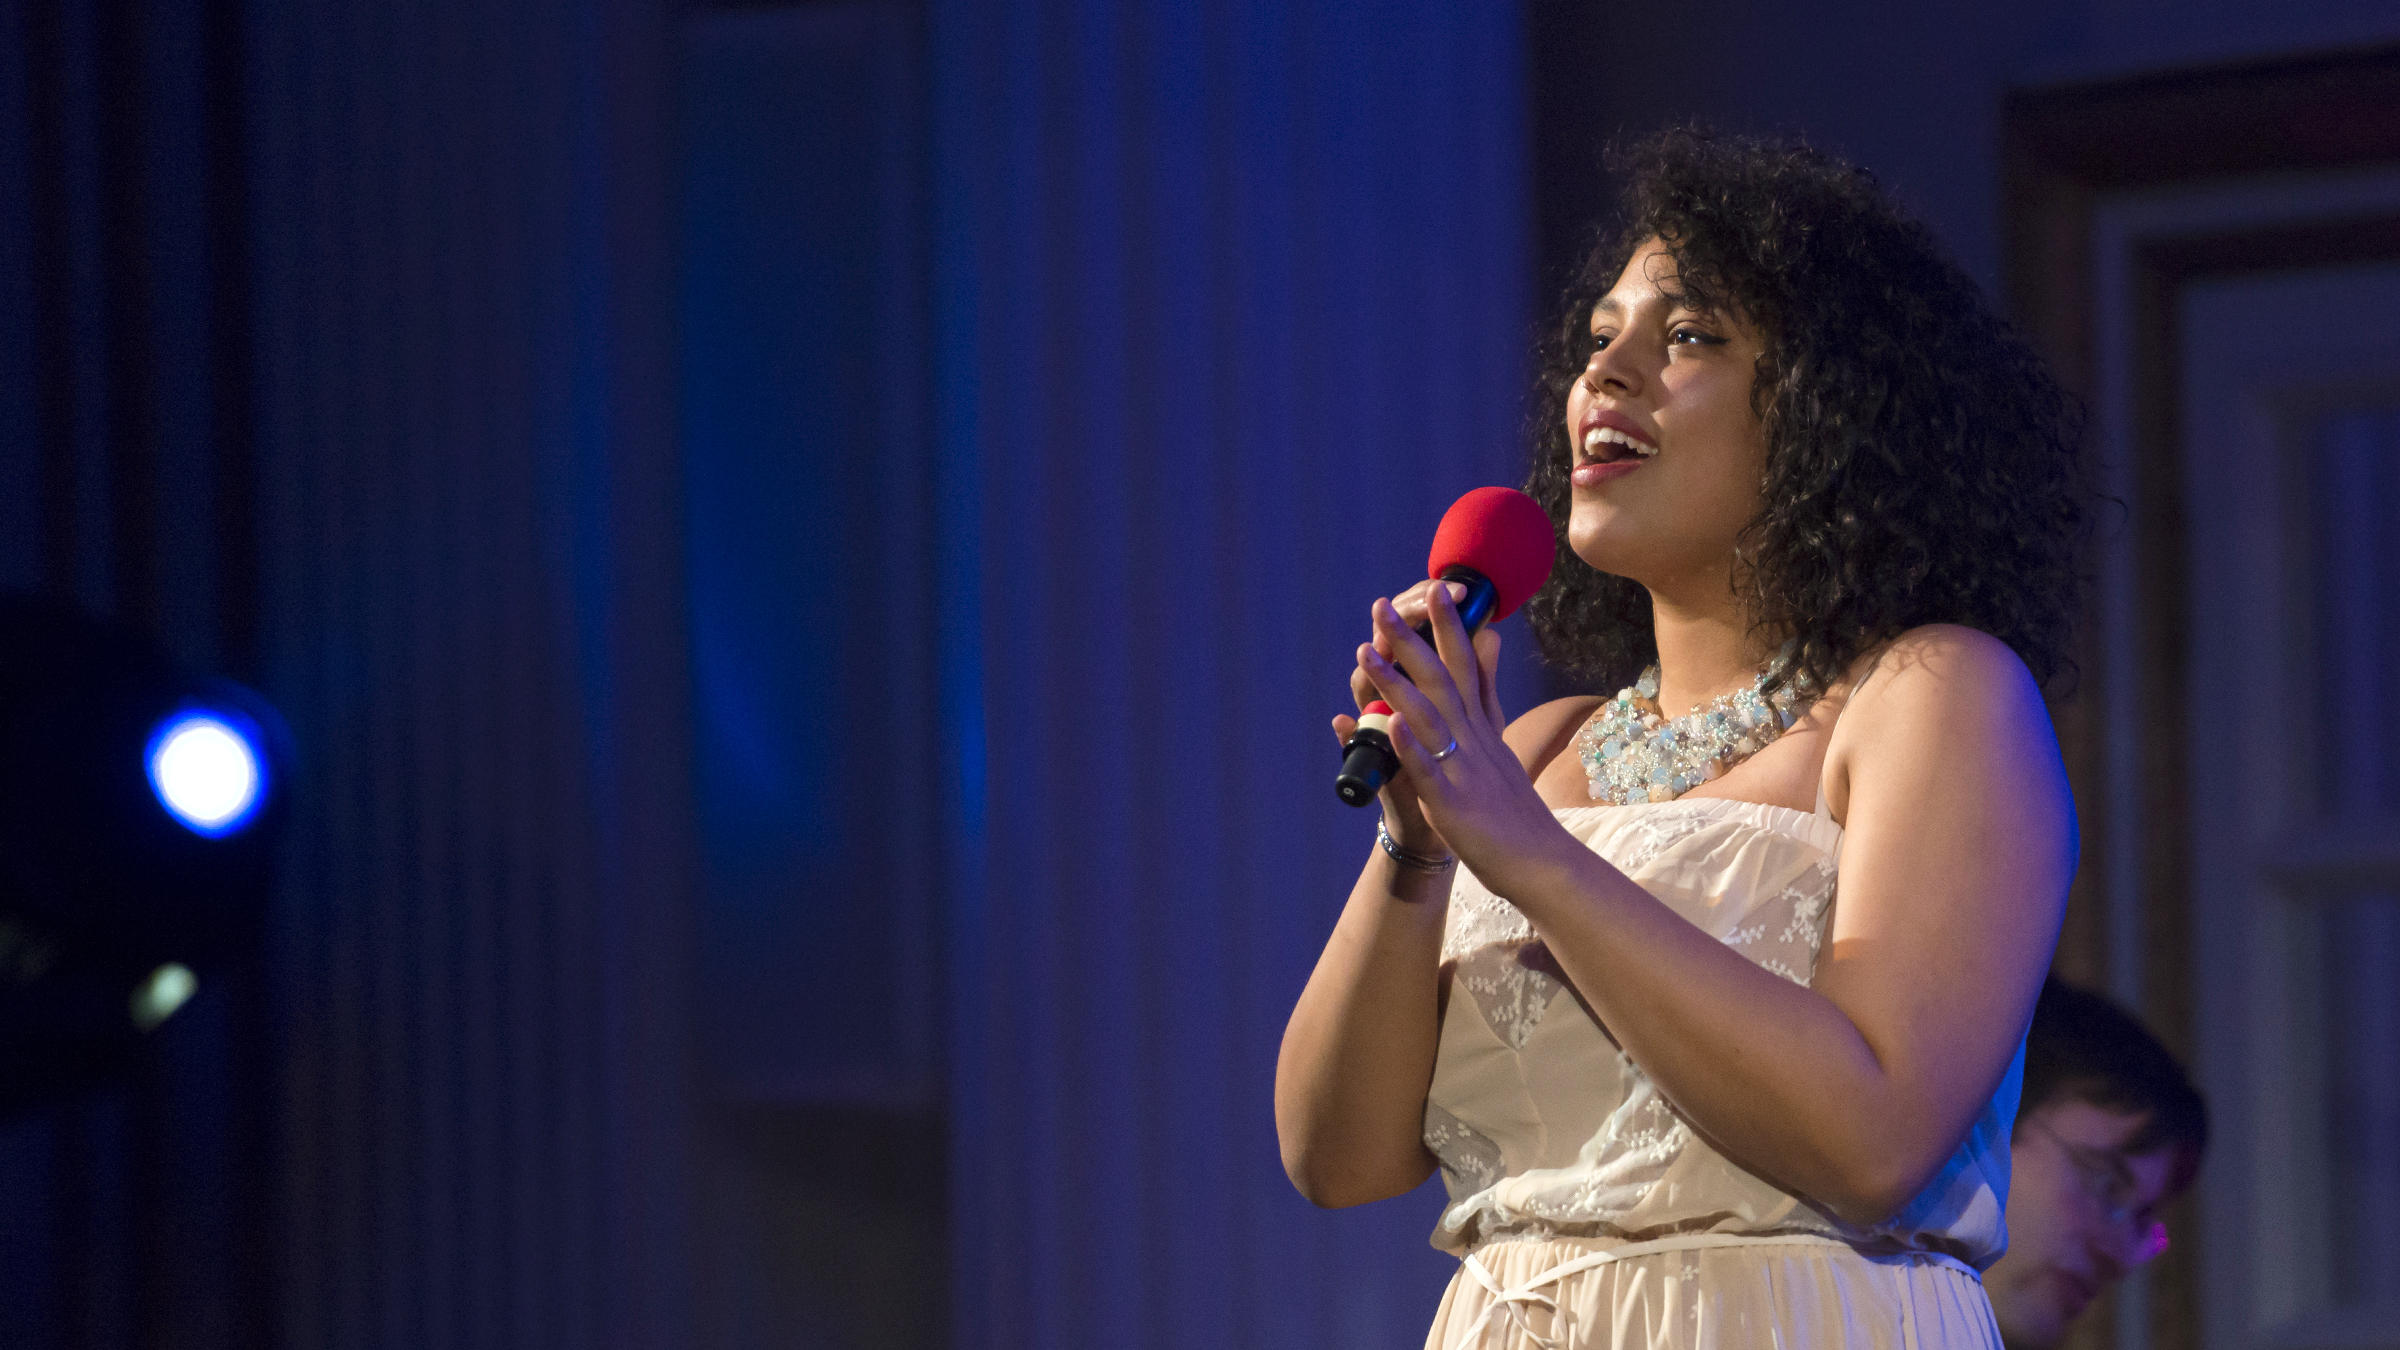 A female jazz singer sings into a microphone.